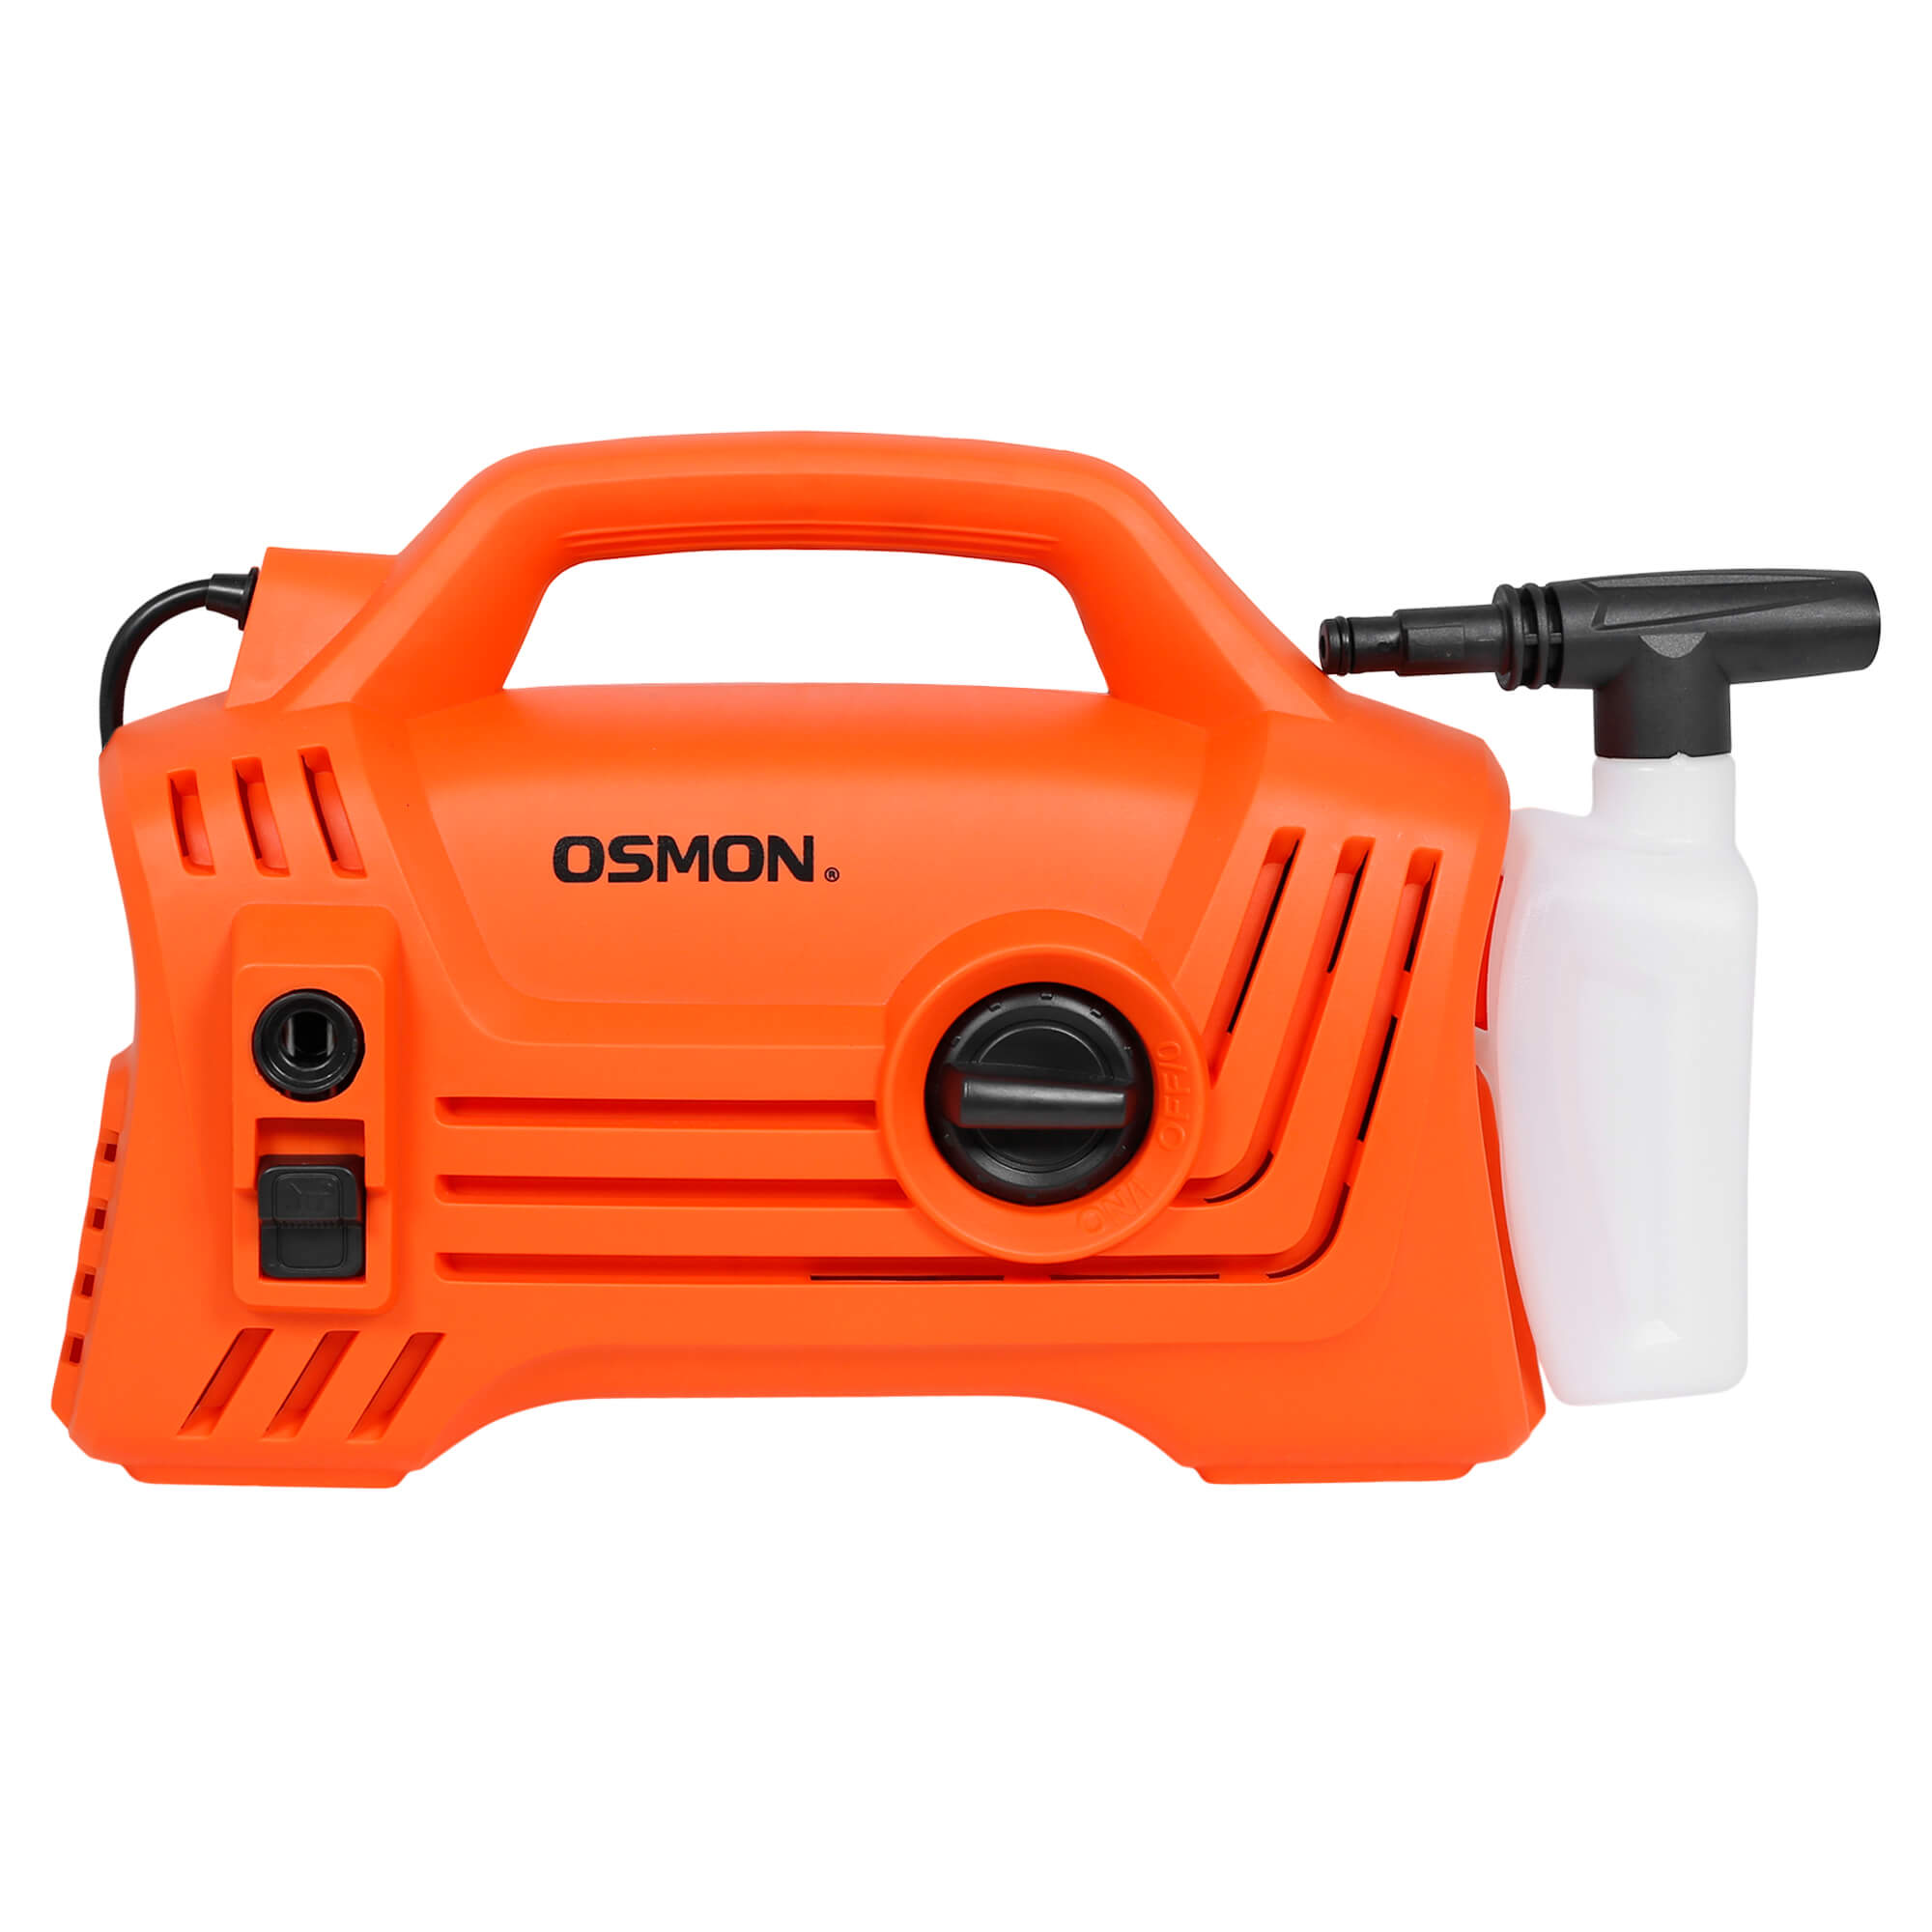 OS PW120 Flow High Pressure Washer in vibrant orange color, perfect for cars, bikes, and home cleaning purposes.